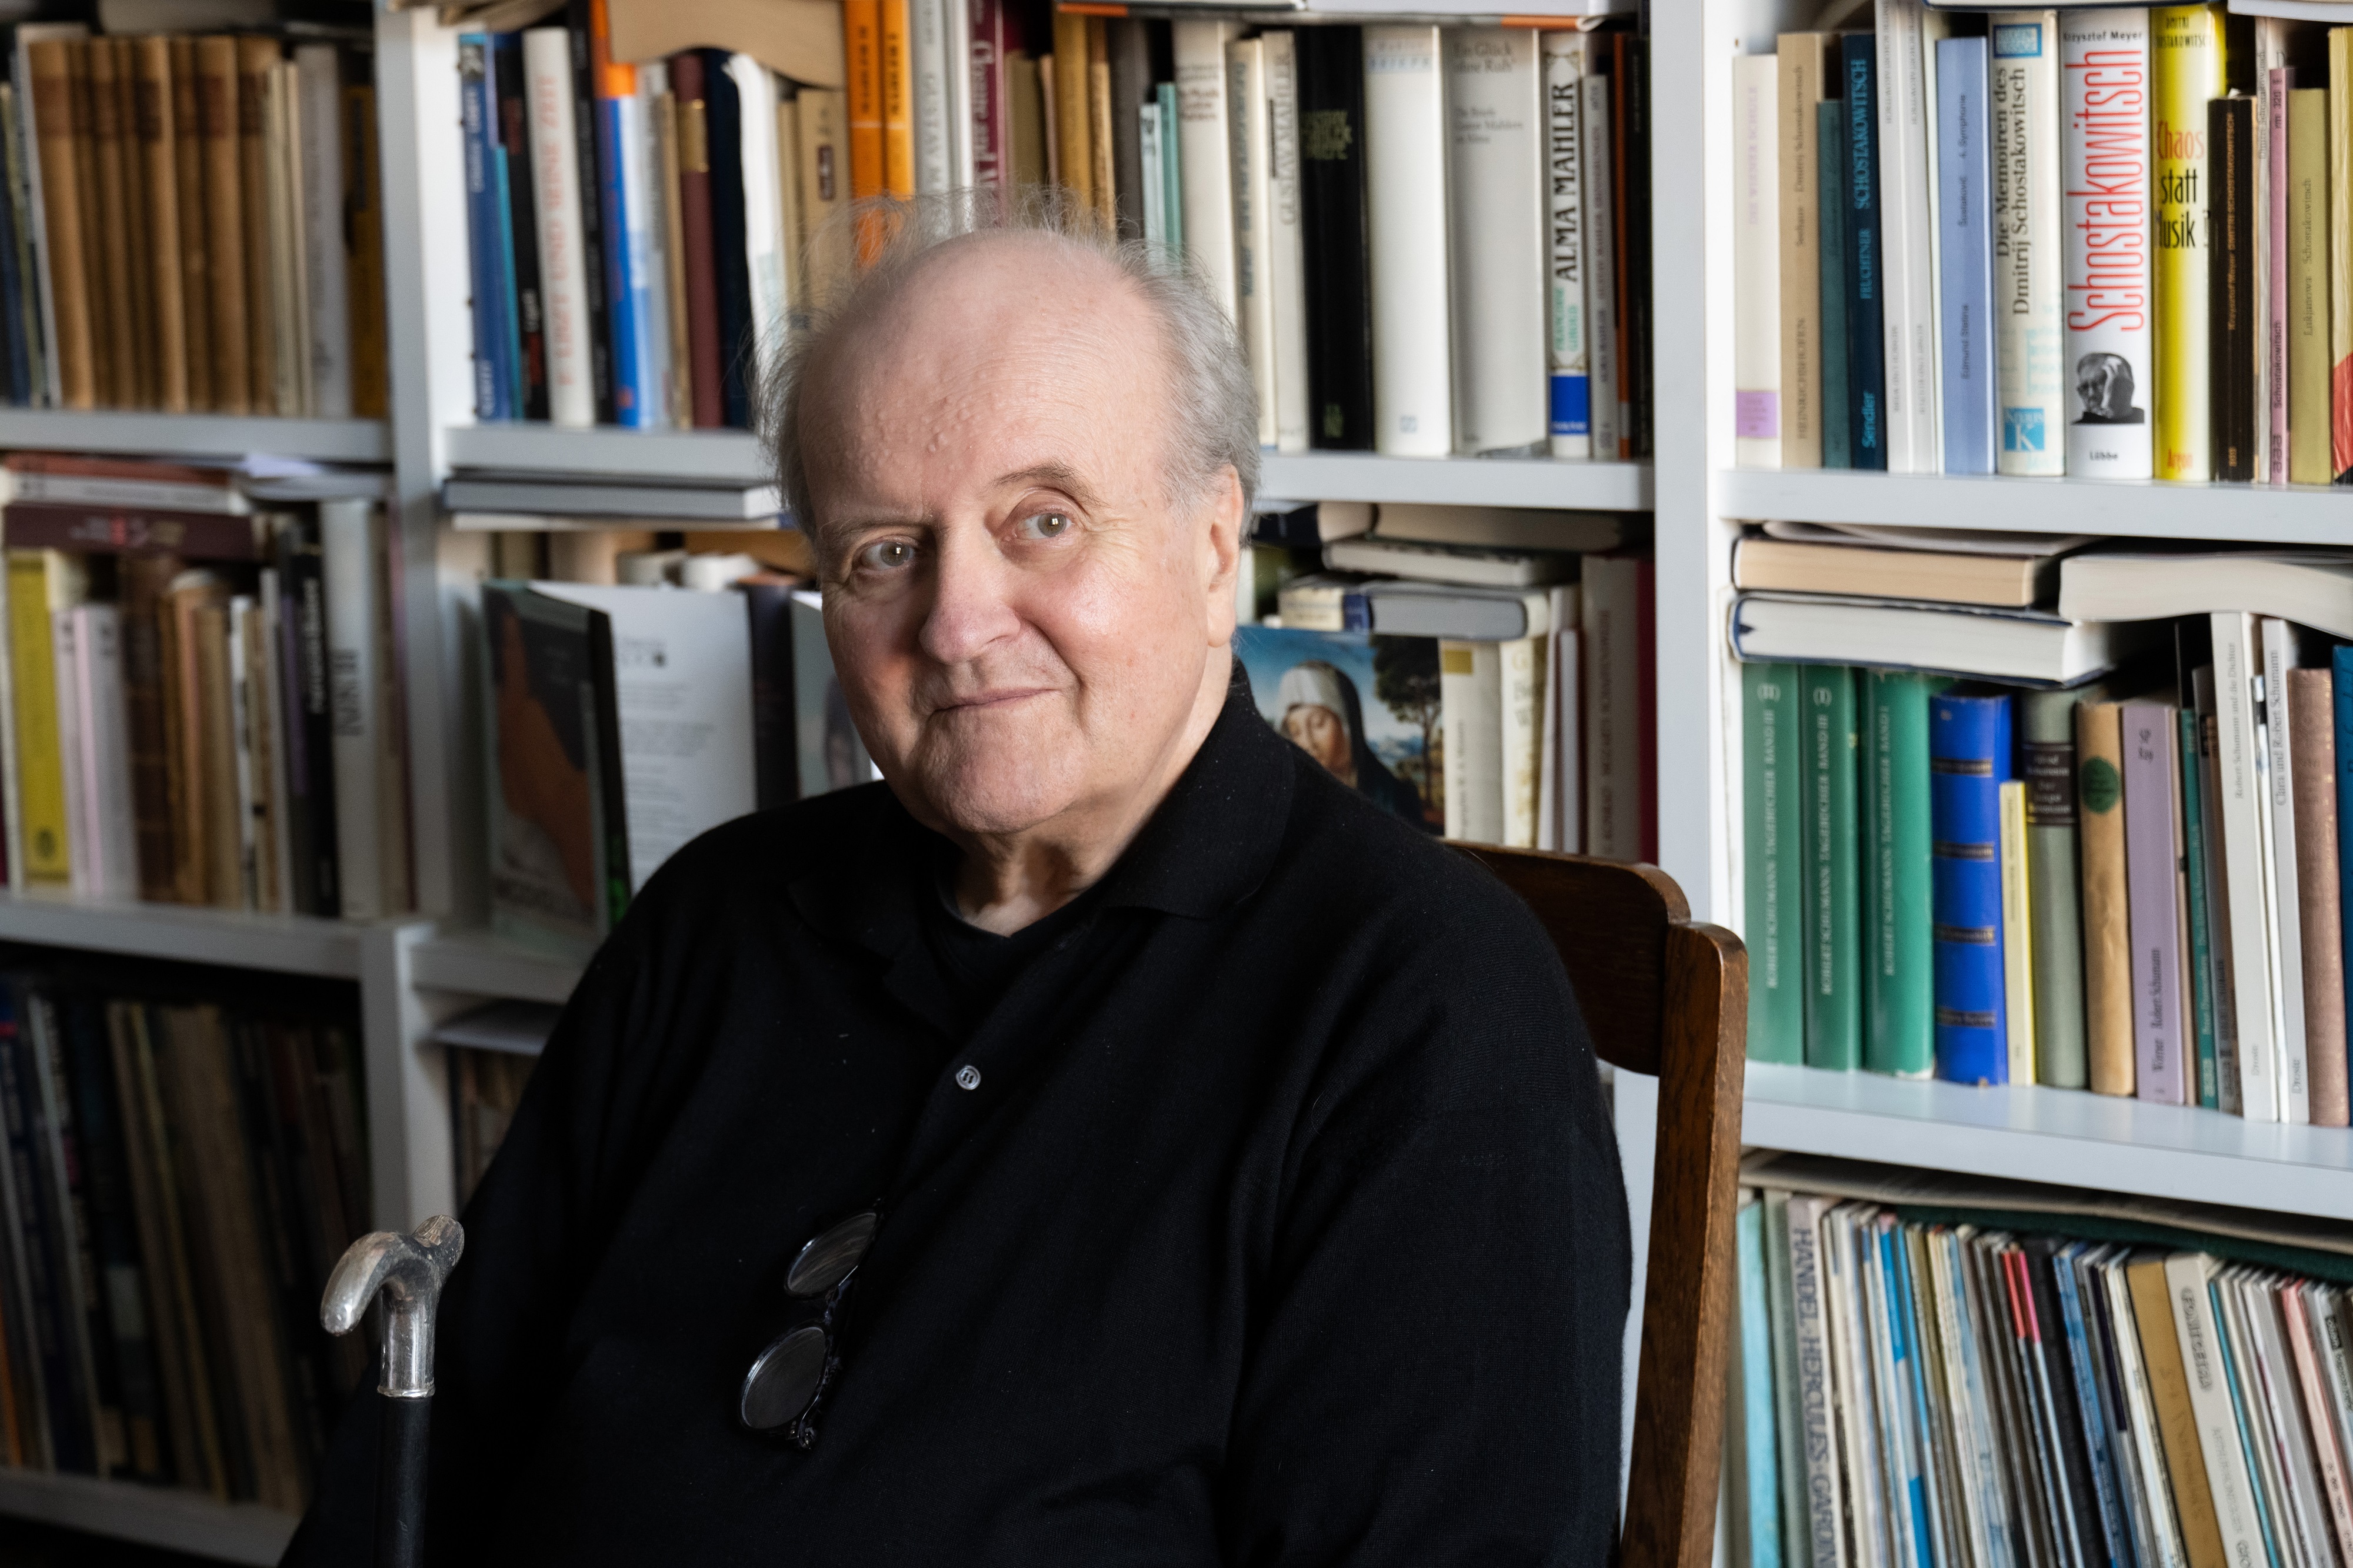 Wolfgang Rihm sits at home in front of his bookshelf